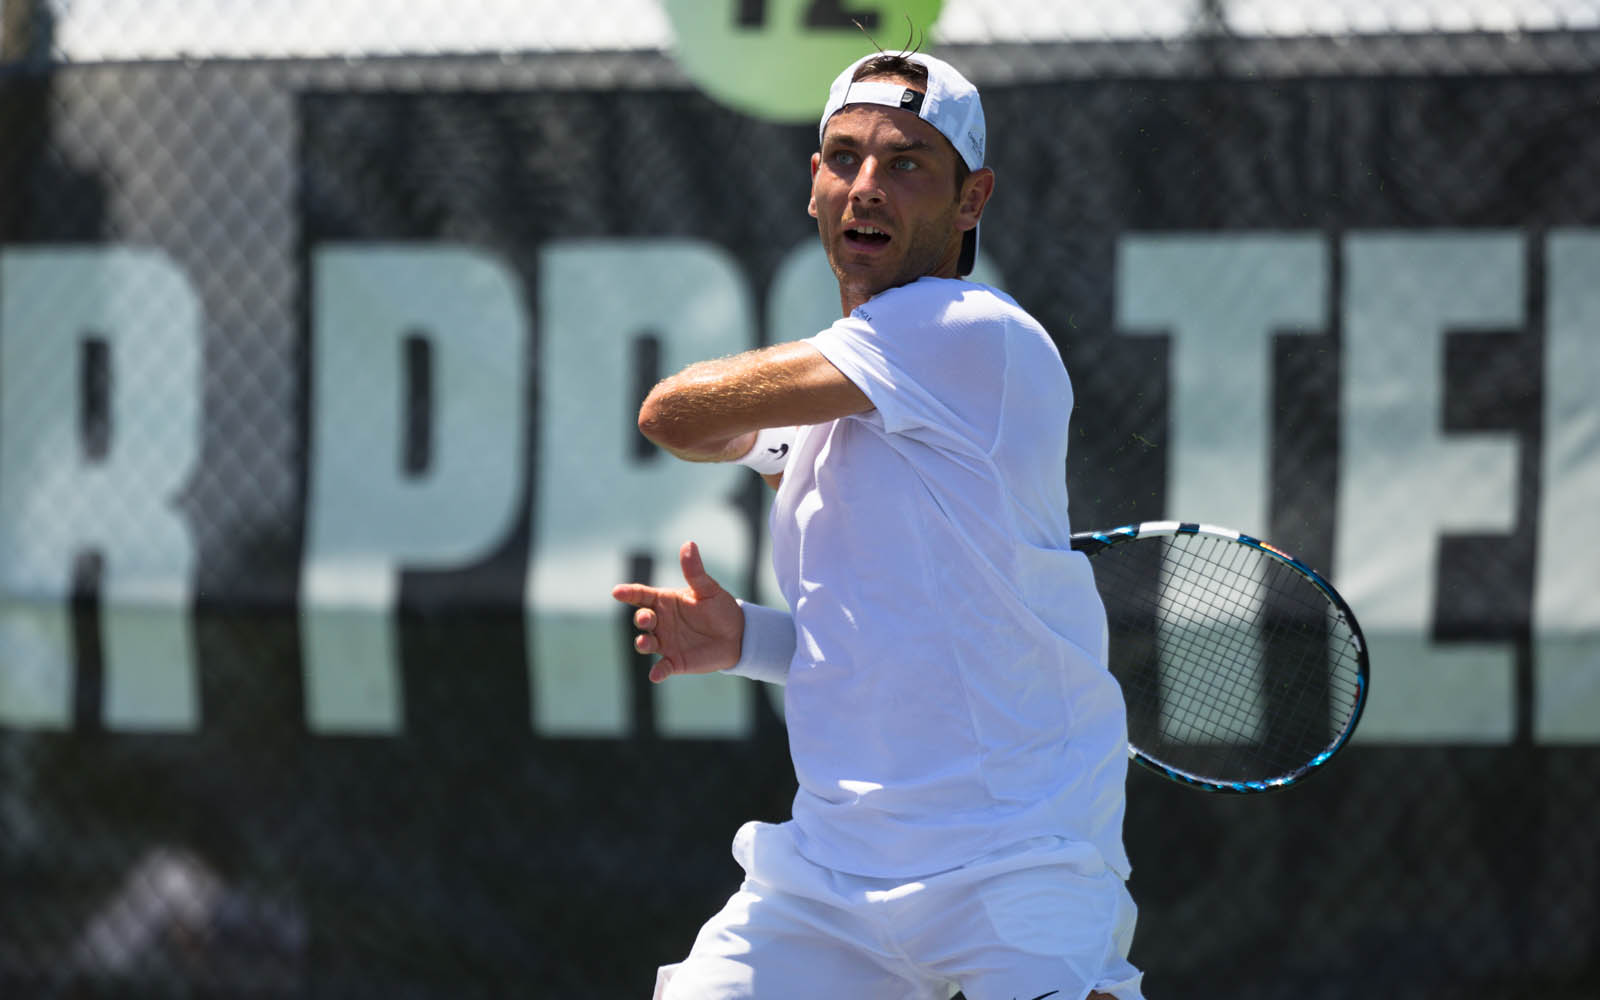 A male tennis player hits a left-handed forehand